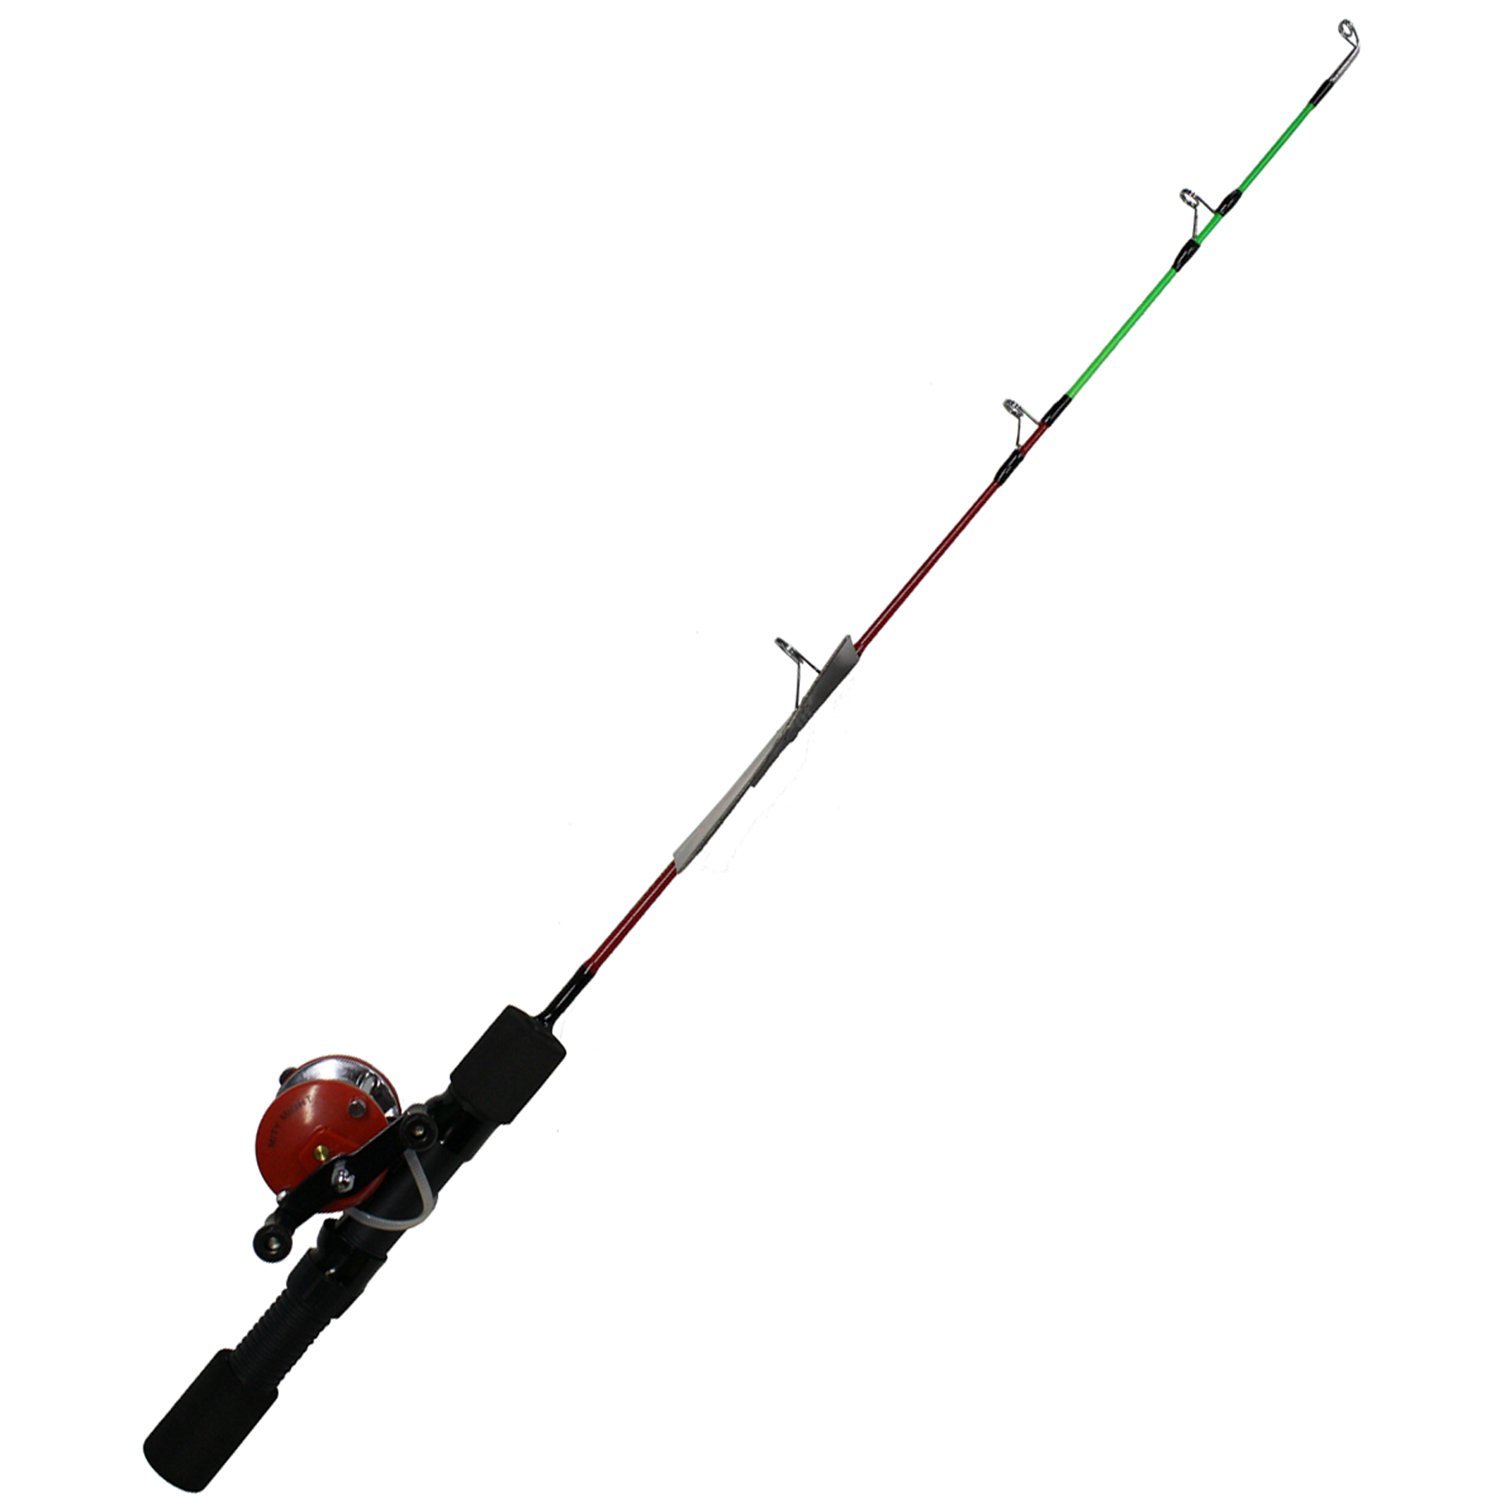 Fishing Rod Vector Free Download - ClipArt Best